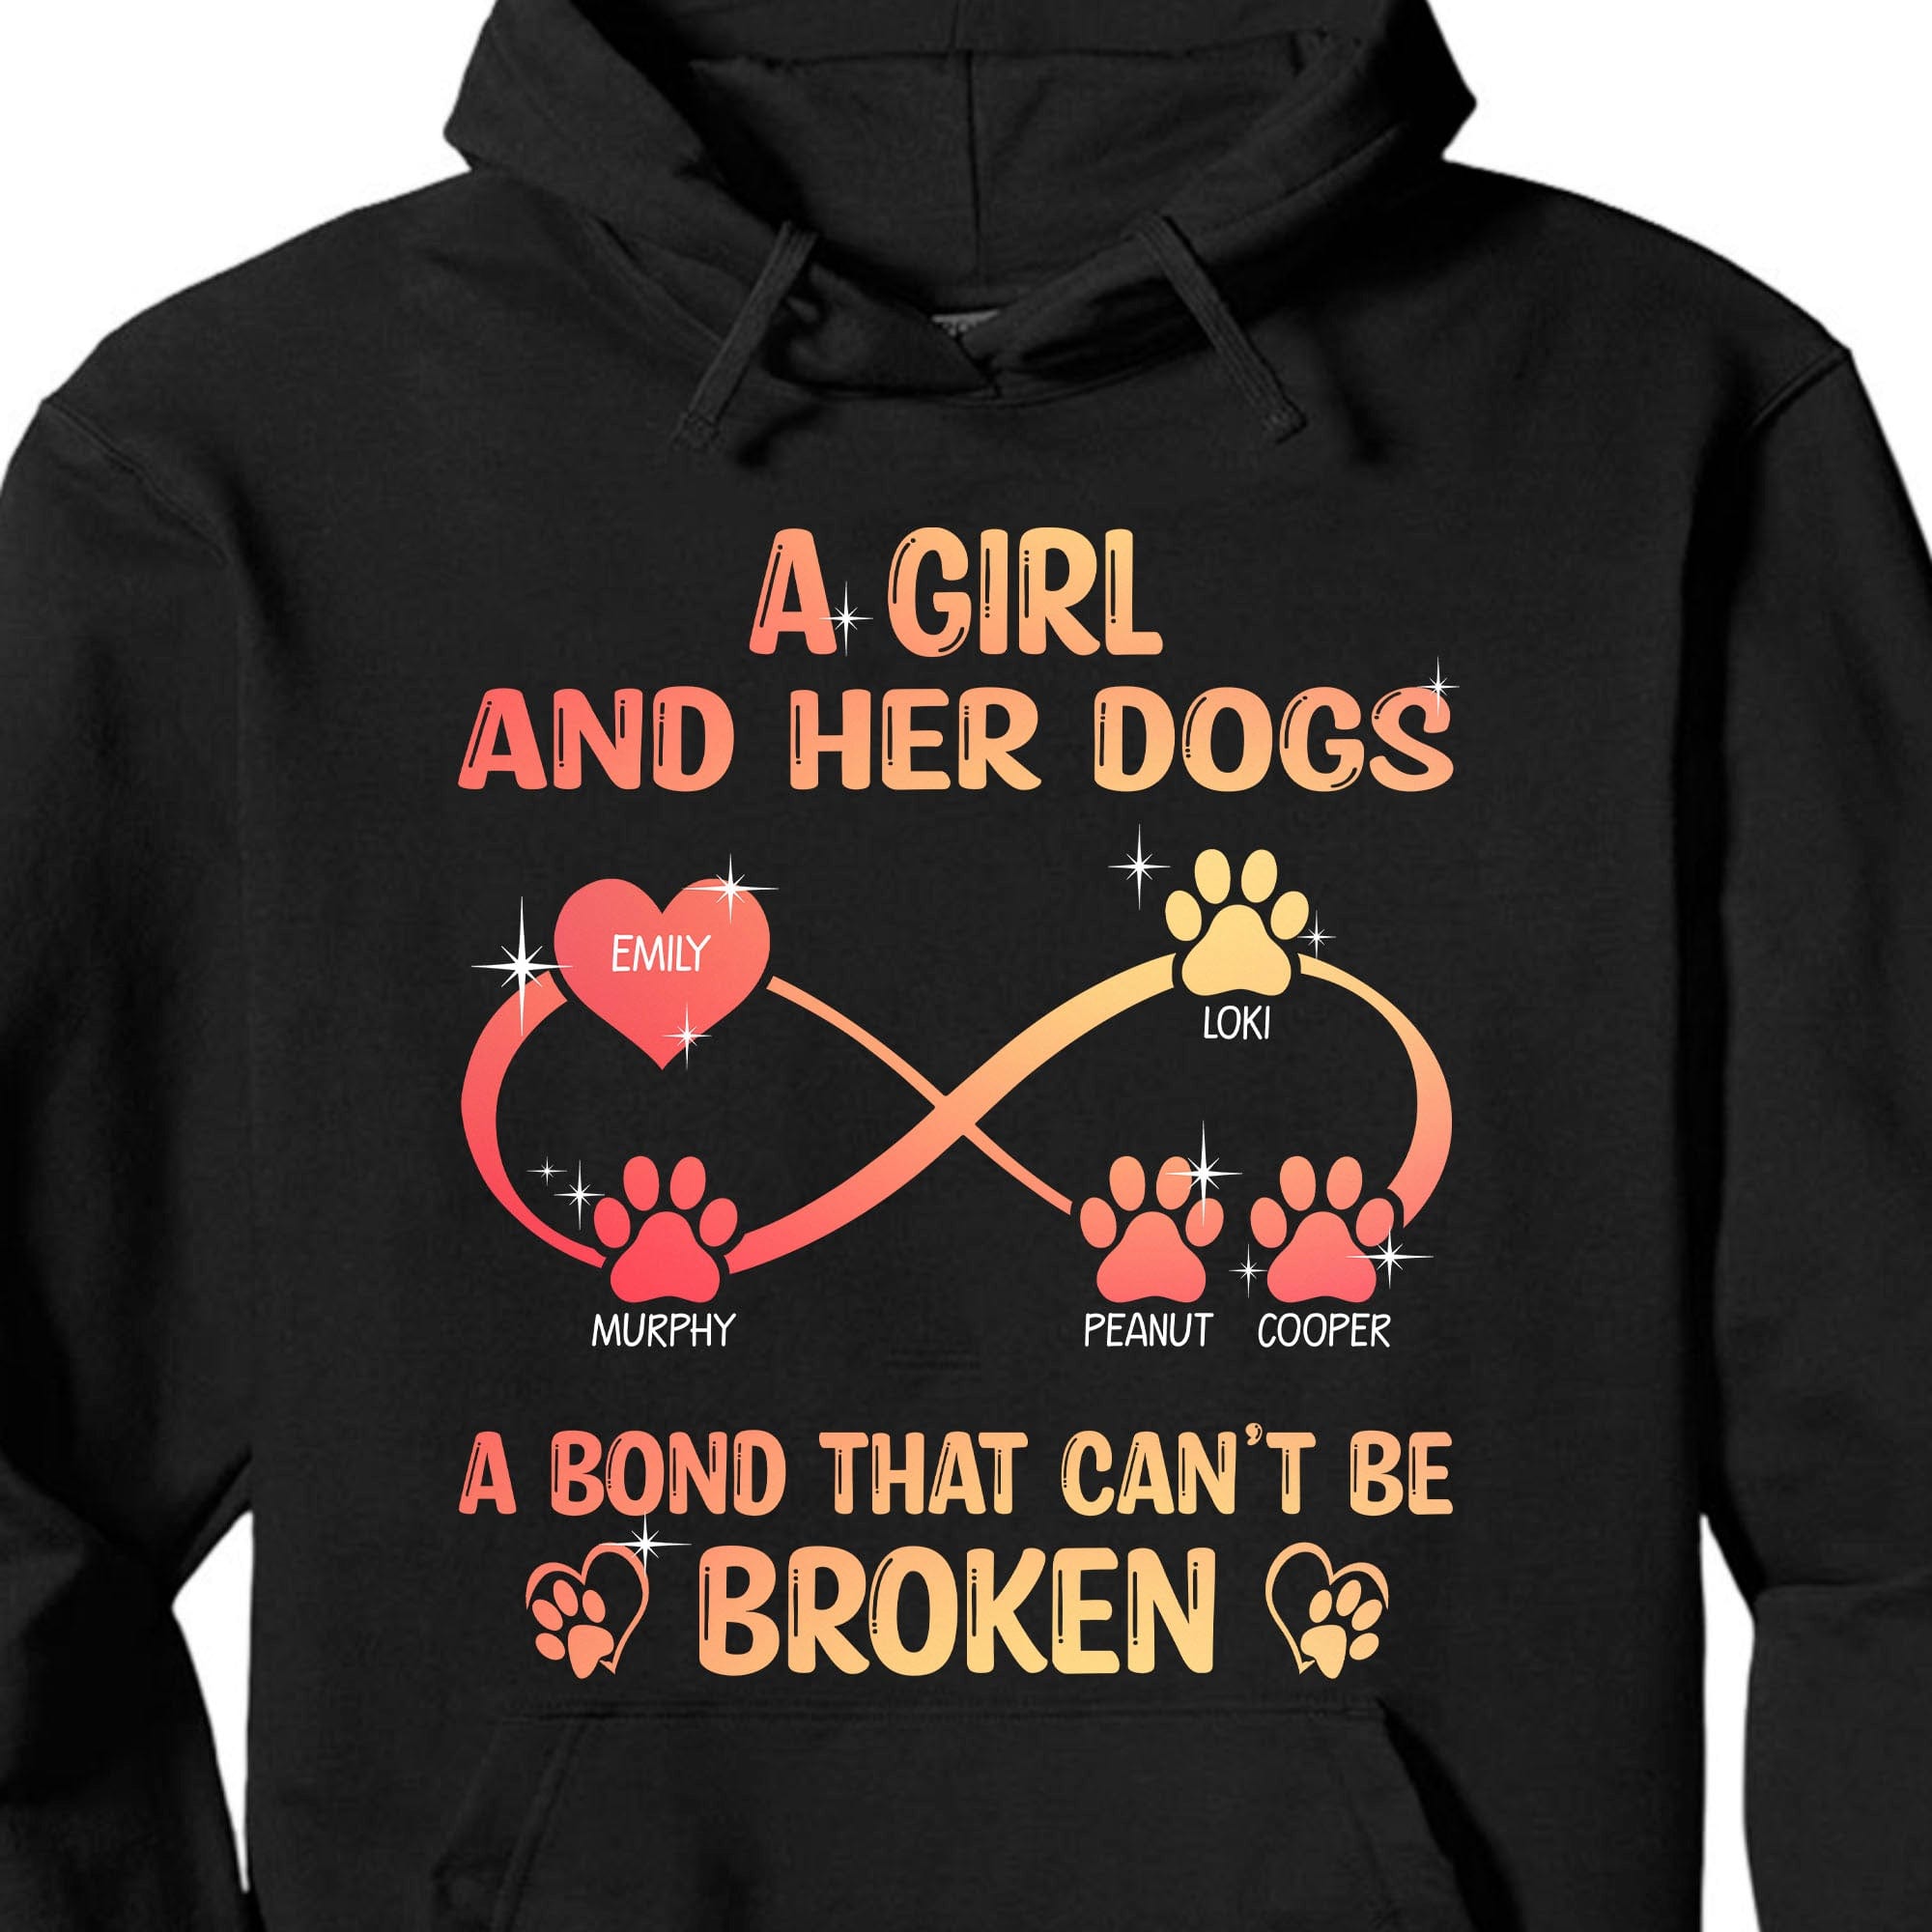 GeckoCustom A Girl And Her Dog A Bond That Can't Be Broken Personalized Custom Dog Frontside Shirt C456 Women Tee / Black Color / S